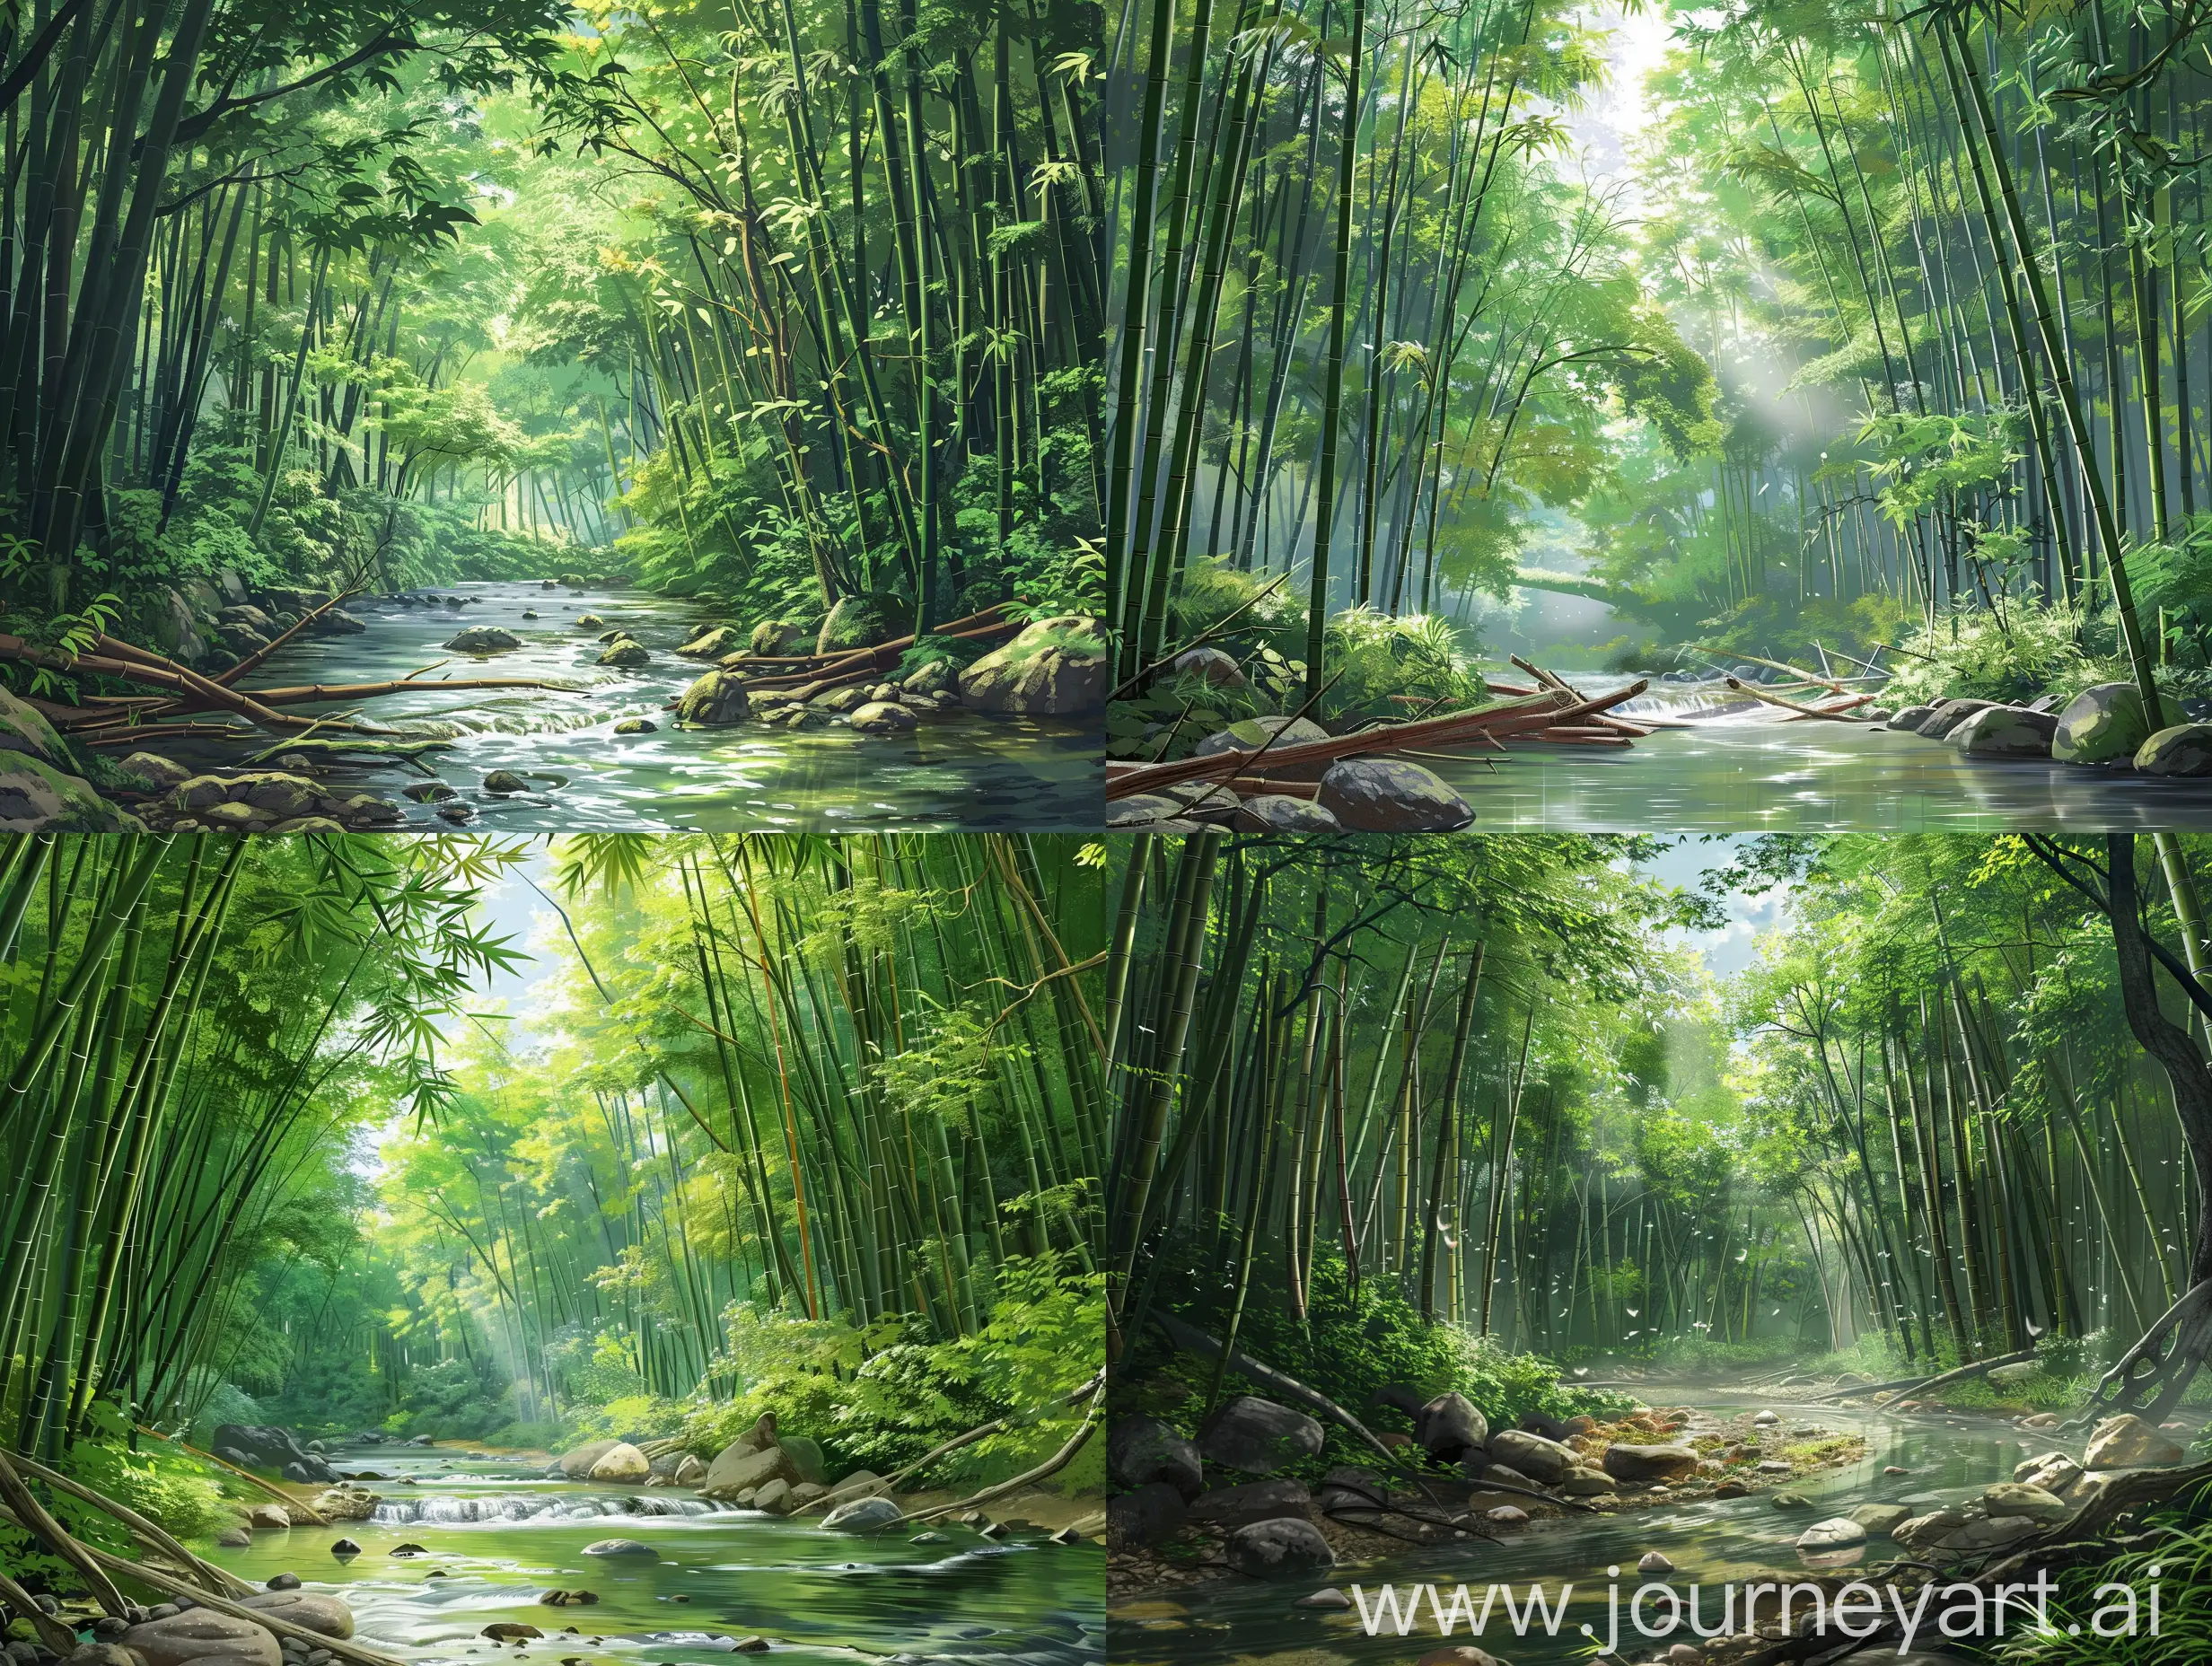 Aesthetic anime style,a highly rendered visual,4 k anime style, a tranquil scene within a bamboo forest. A gentle river meanders through the center, flanked by tall bamboo stalks that stretch towards the sky. The green leaves form a canopy above, with sunlight filtering through to create a dappled effect on the forest floor and the river’s surface. Rocks and fallen branches add a natural ruggedness to the peaceful setting, enhancing the forest’s mystical ambiance. This serene landscape, with its interplay of light and shadow, invites a moment of reflection and calm,sharp detailing.